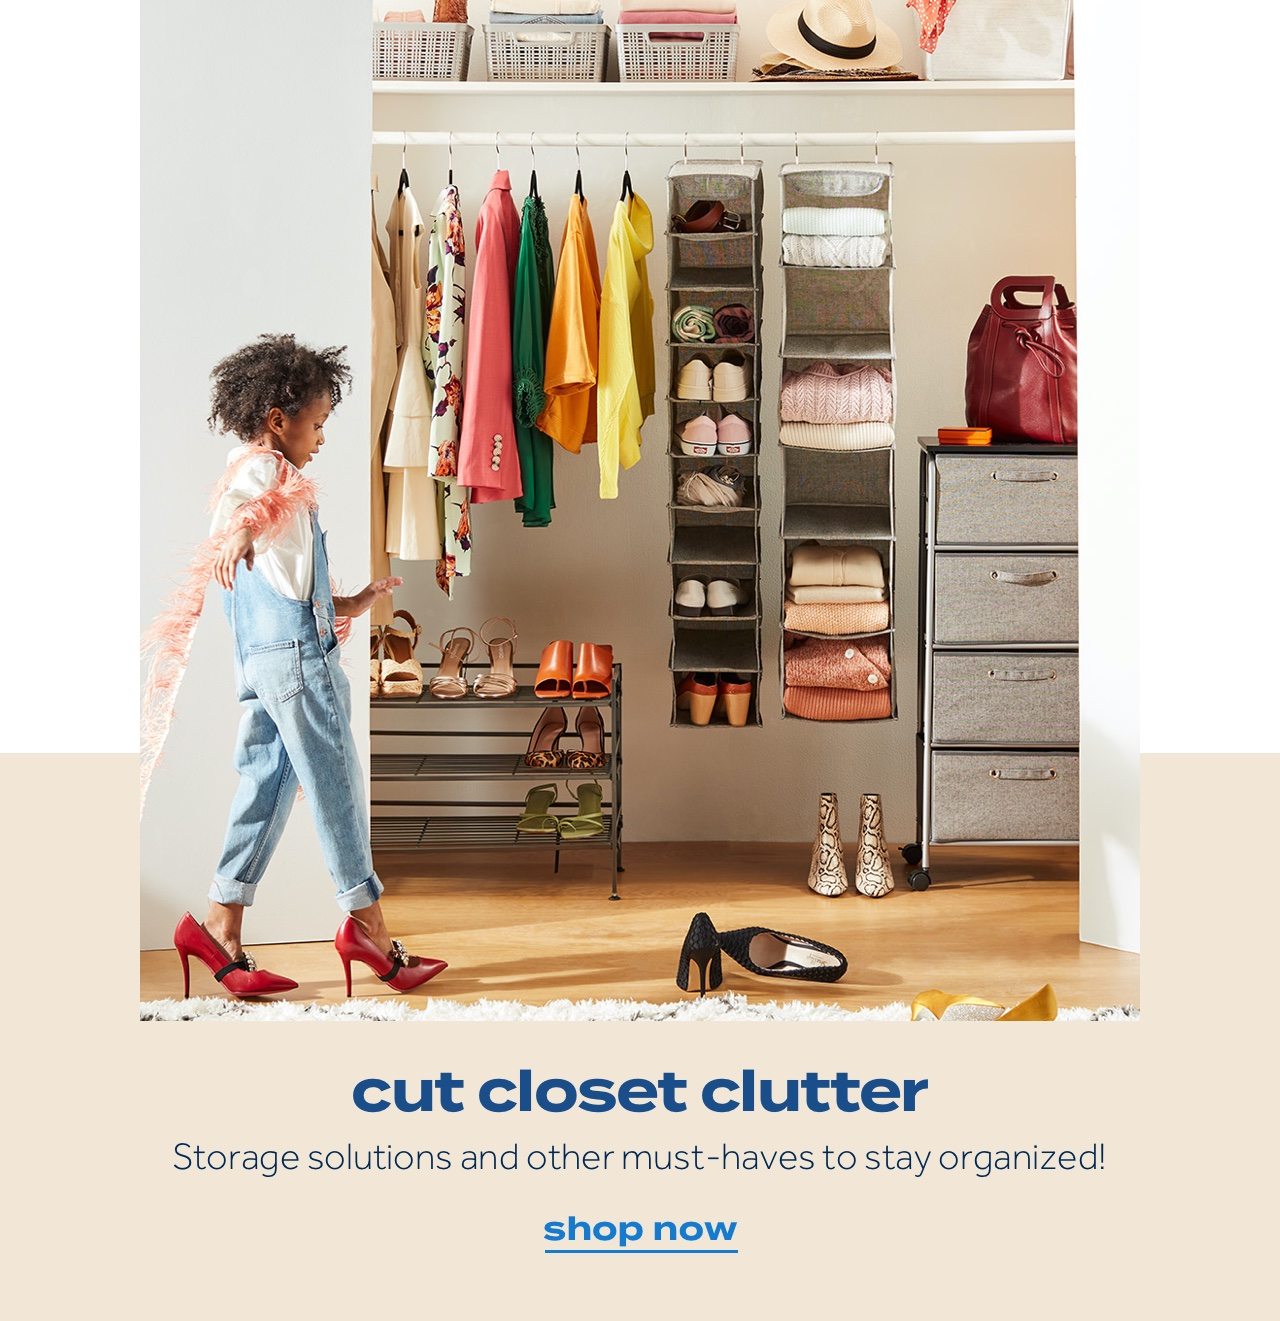 cut closet clutter | Storage solutions and other must-haves to stay organized! | shop now